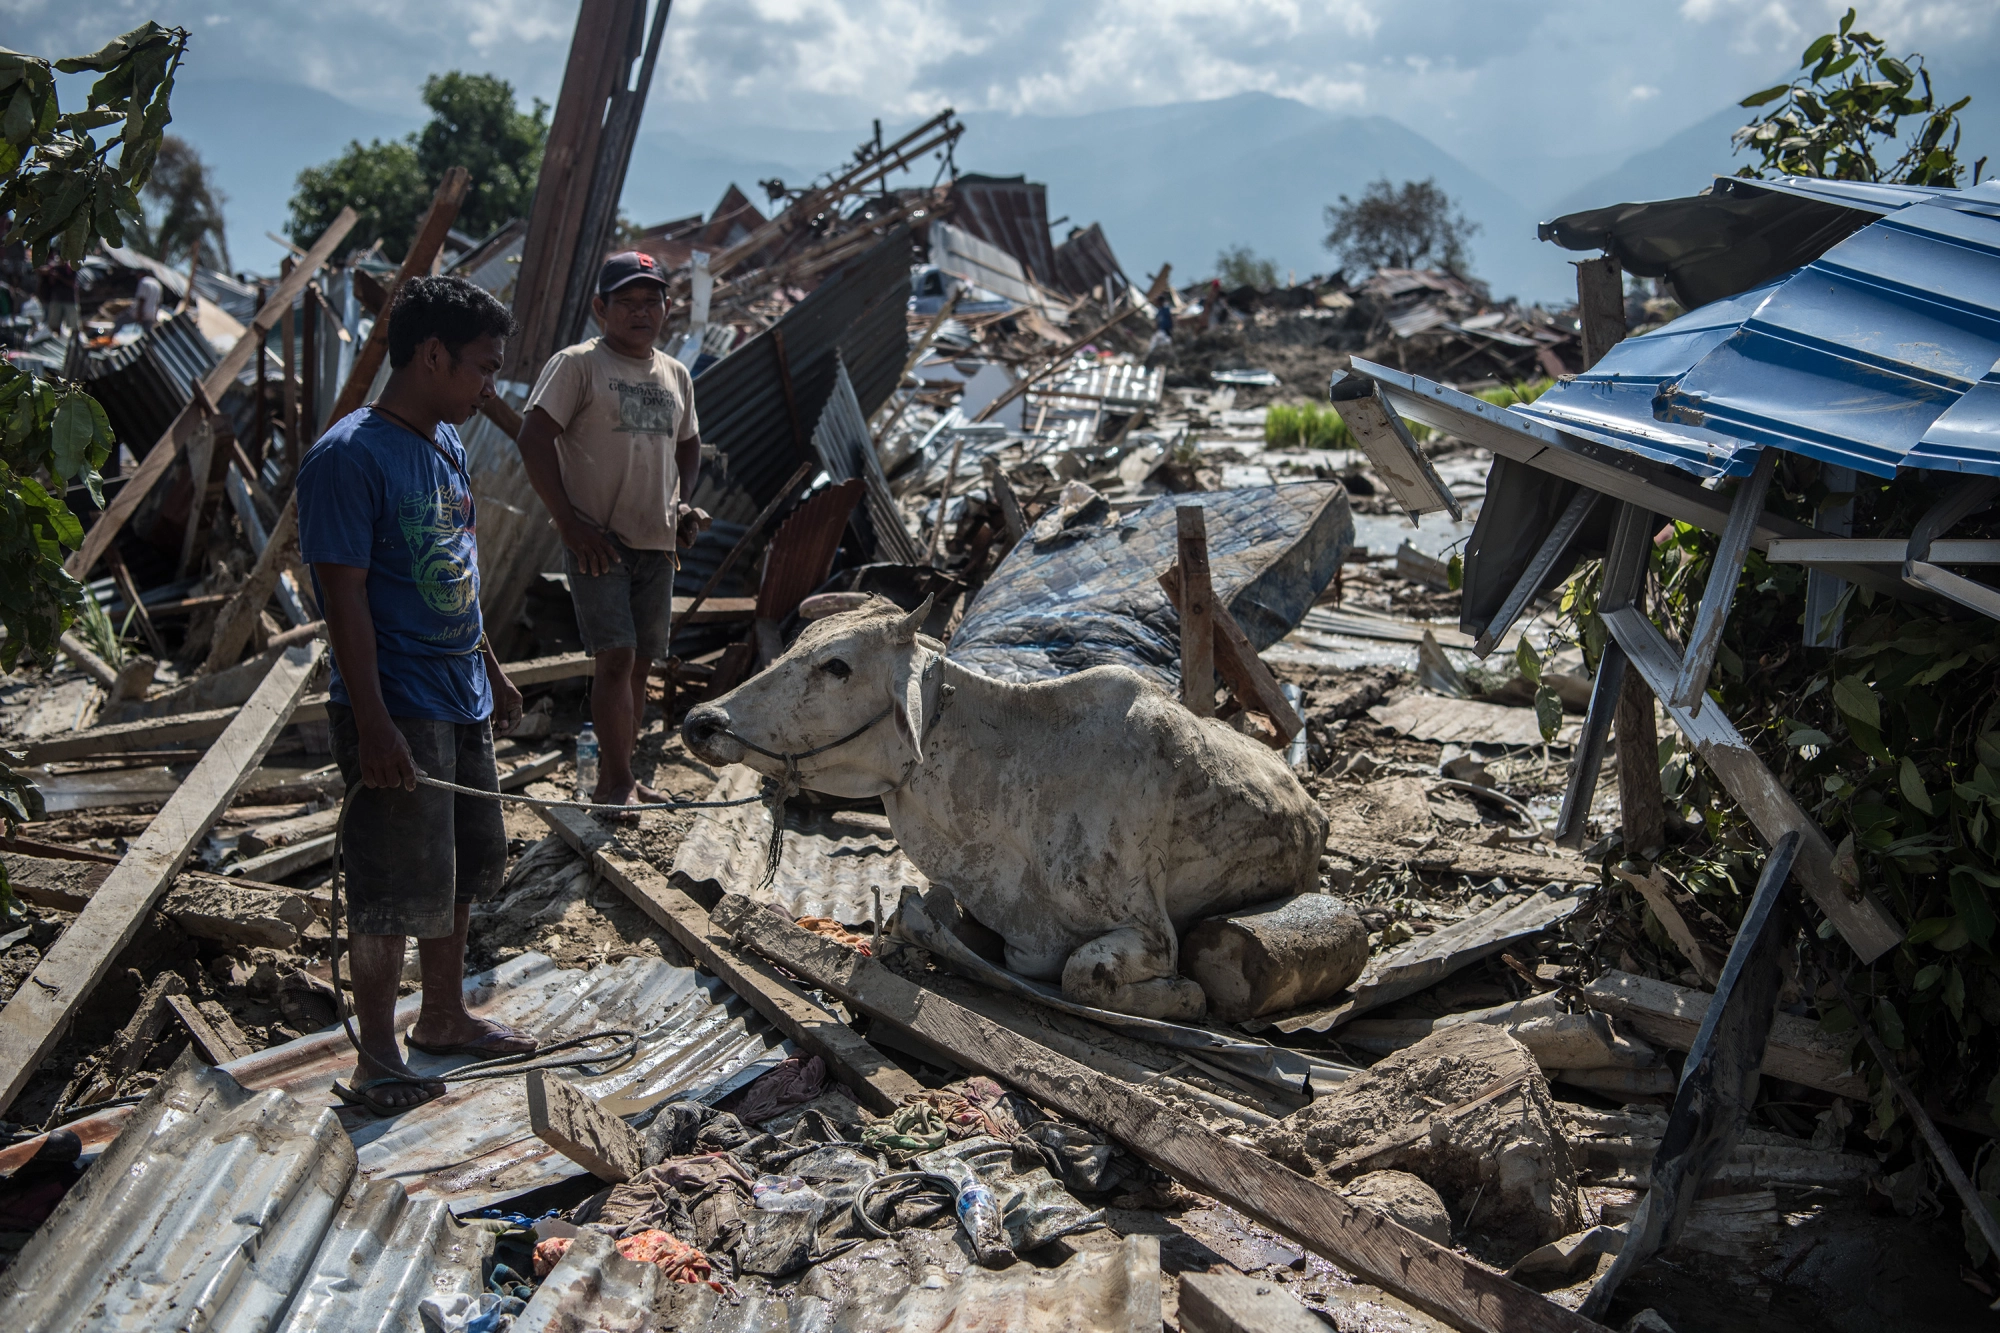 People try to move a cow as it sits in the rubble of destroyed buildings following an earthquake, 2018 in Palu, Indonesia